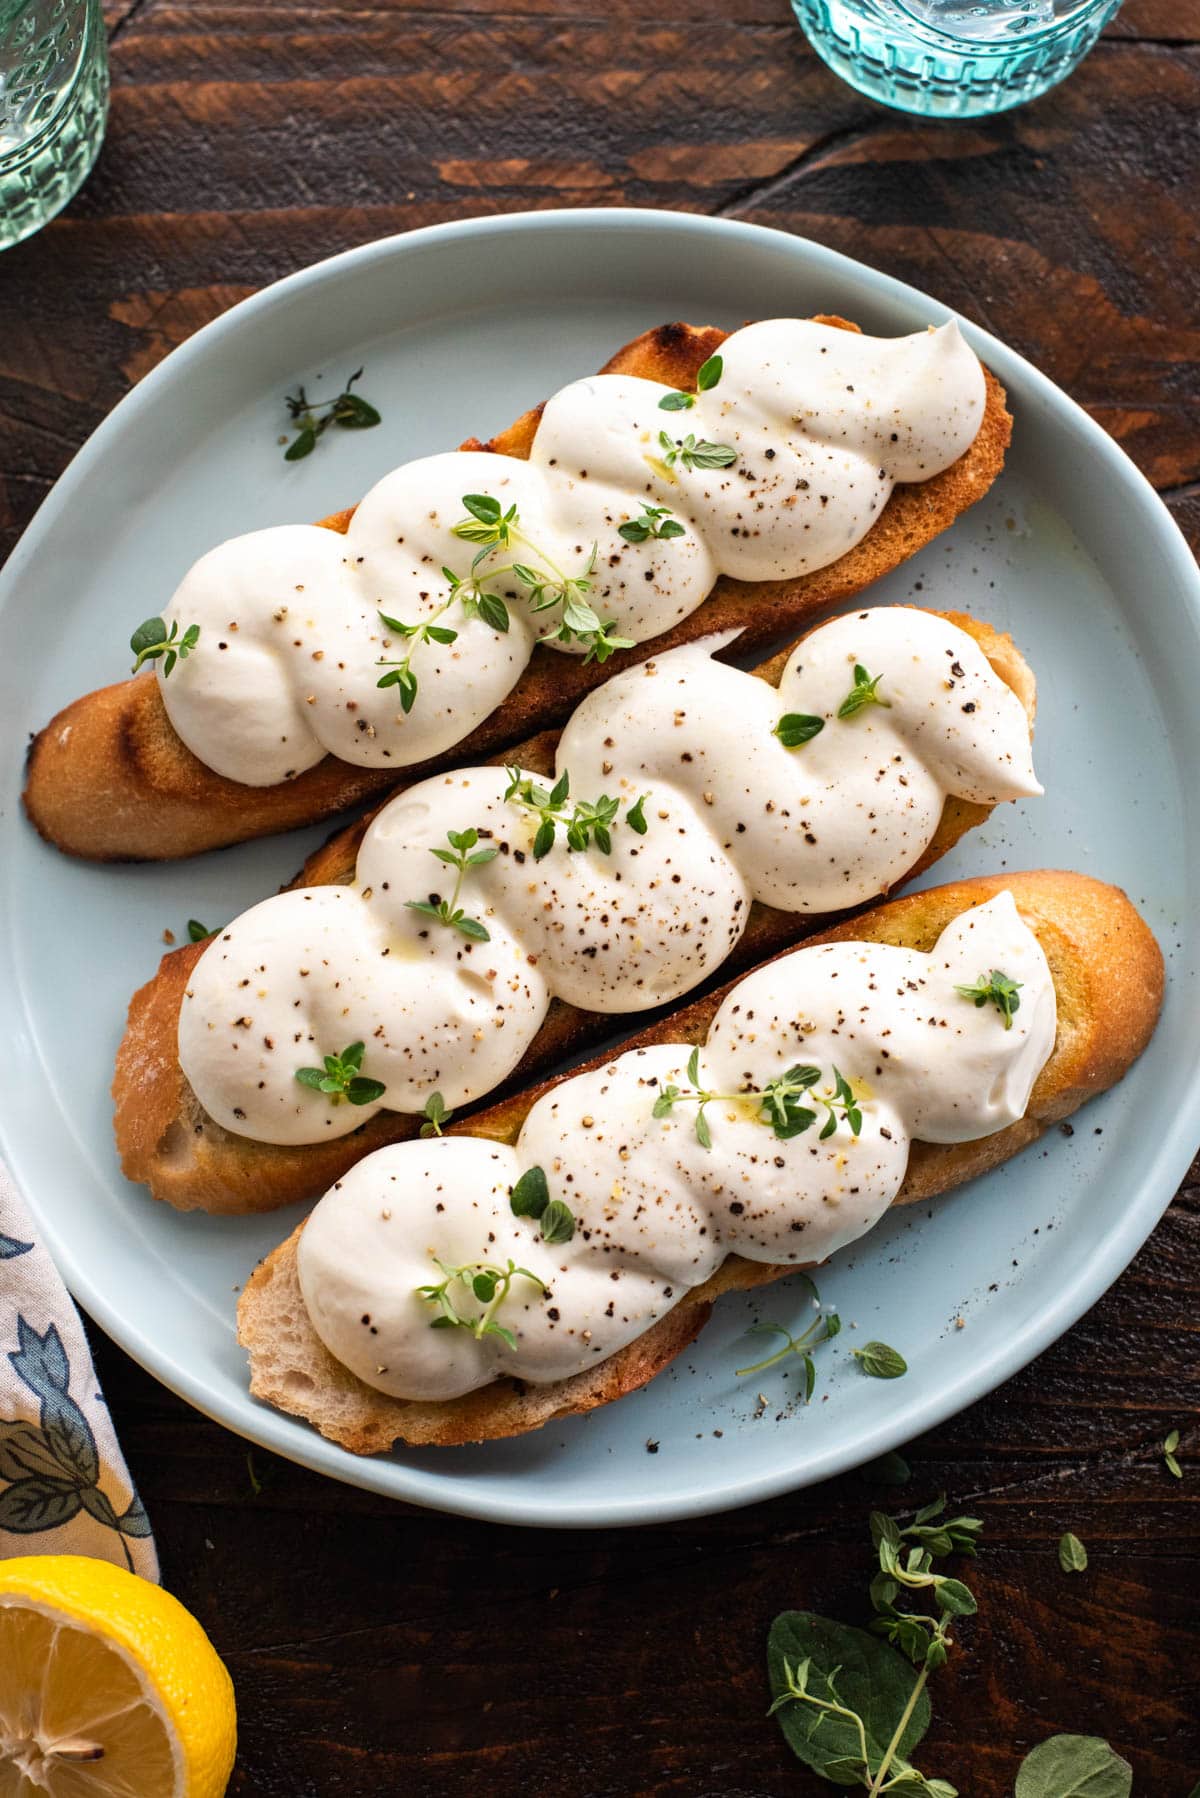 Three pieces of bruschetta toast, topped with piped whipped ricotta and resting on a light blue plate.